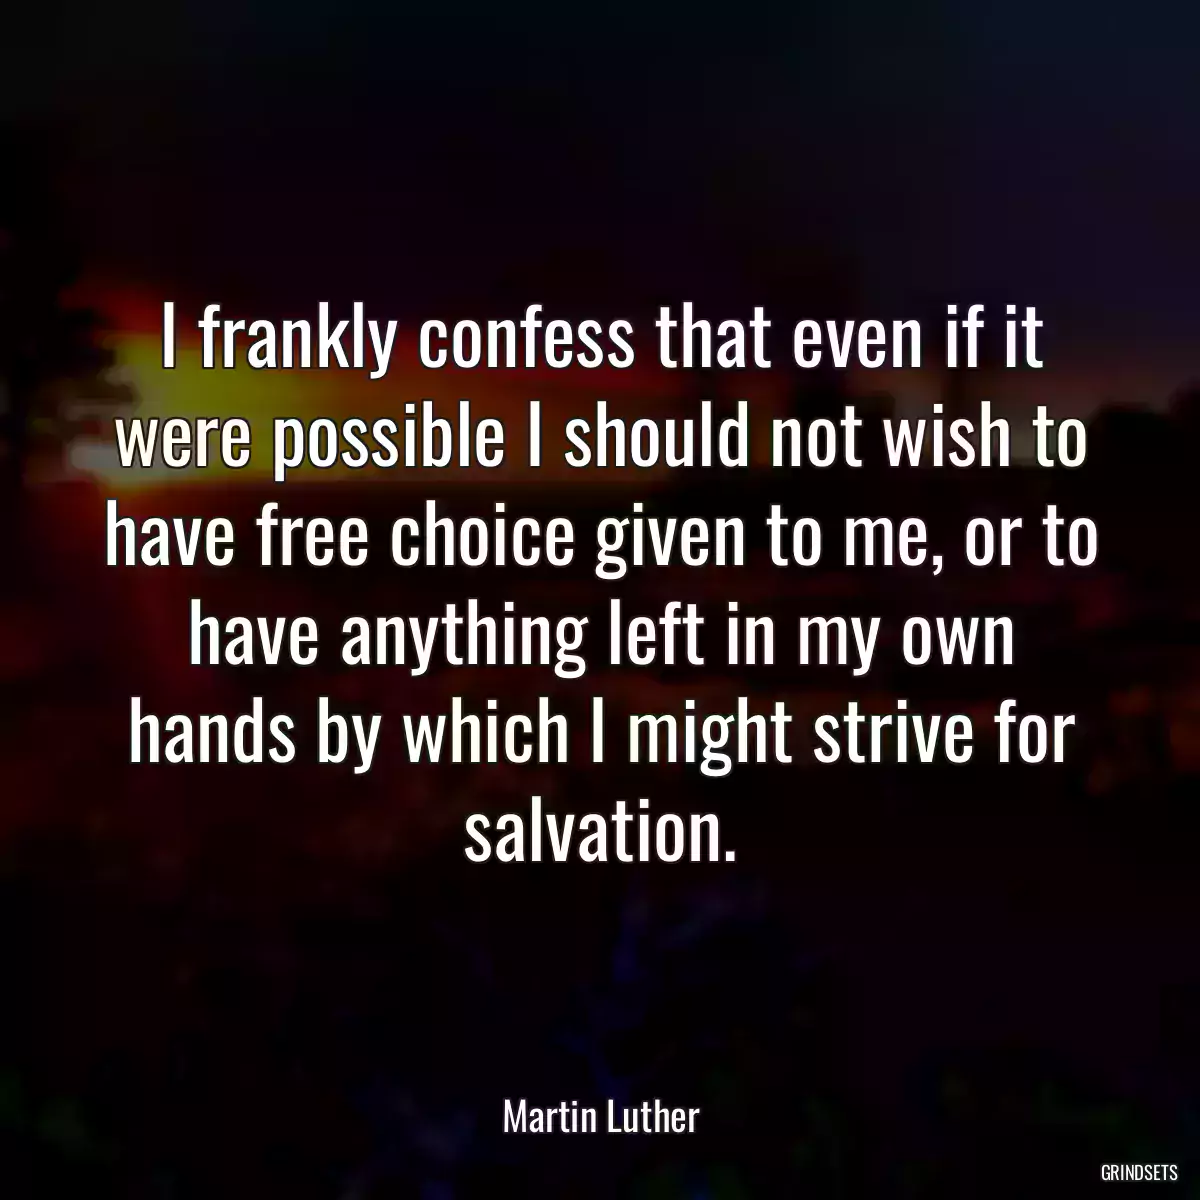 I frankly confess that even if it were possible I should not wish to have free choice given to me, or to have anything left in my own hands by which I might strive for salvation.